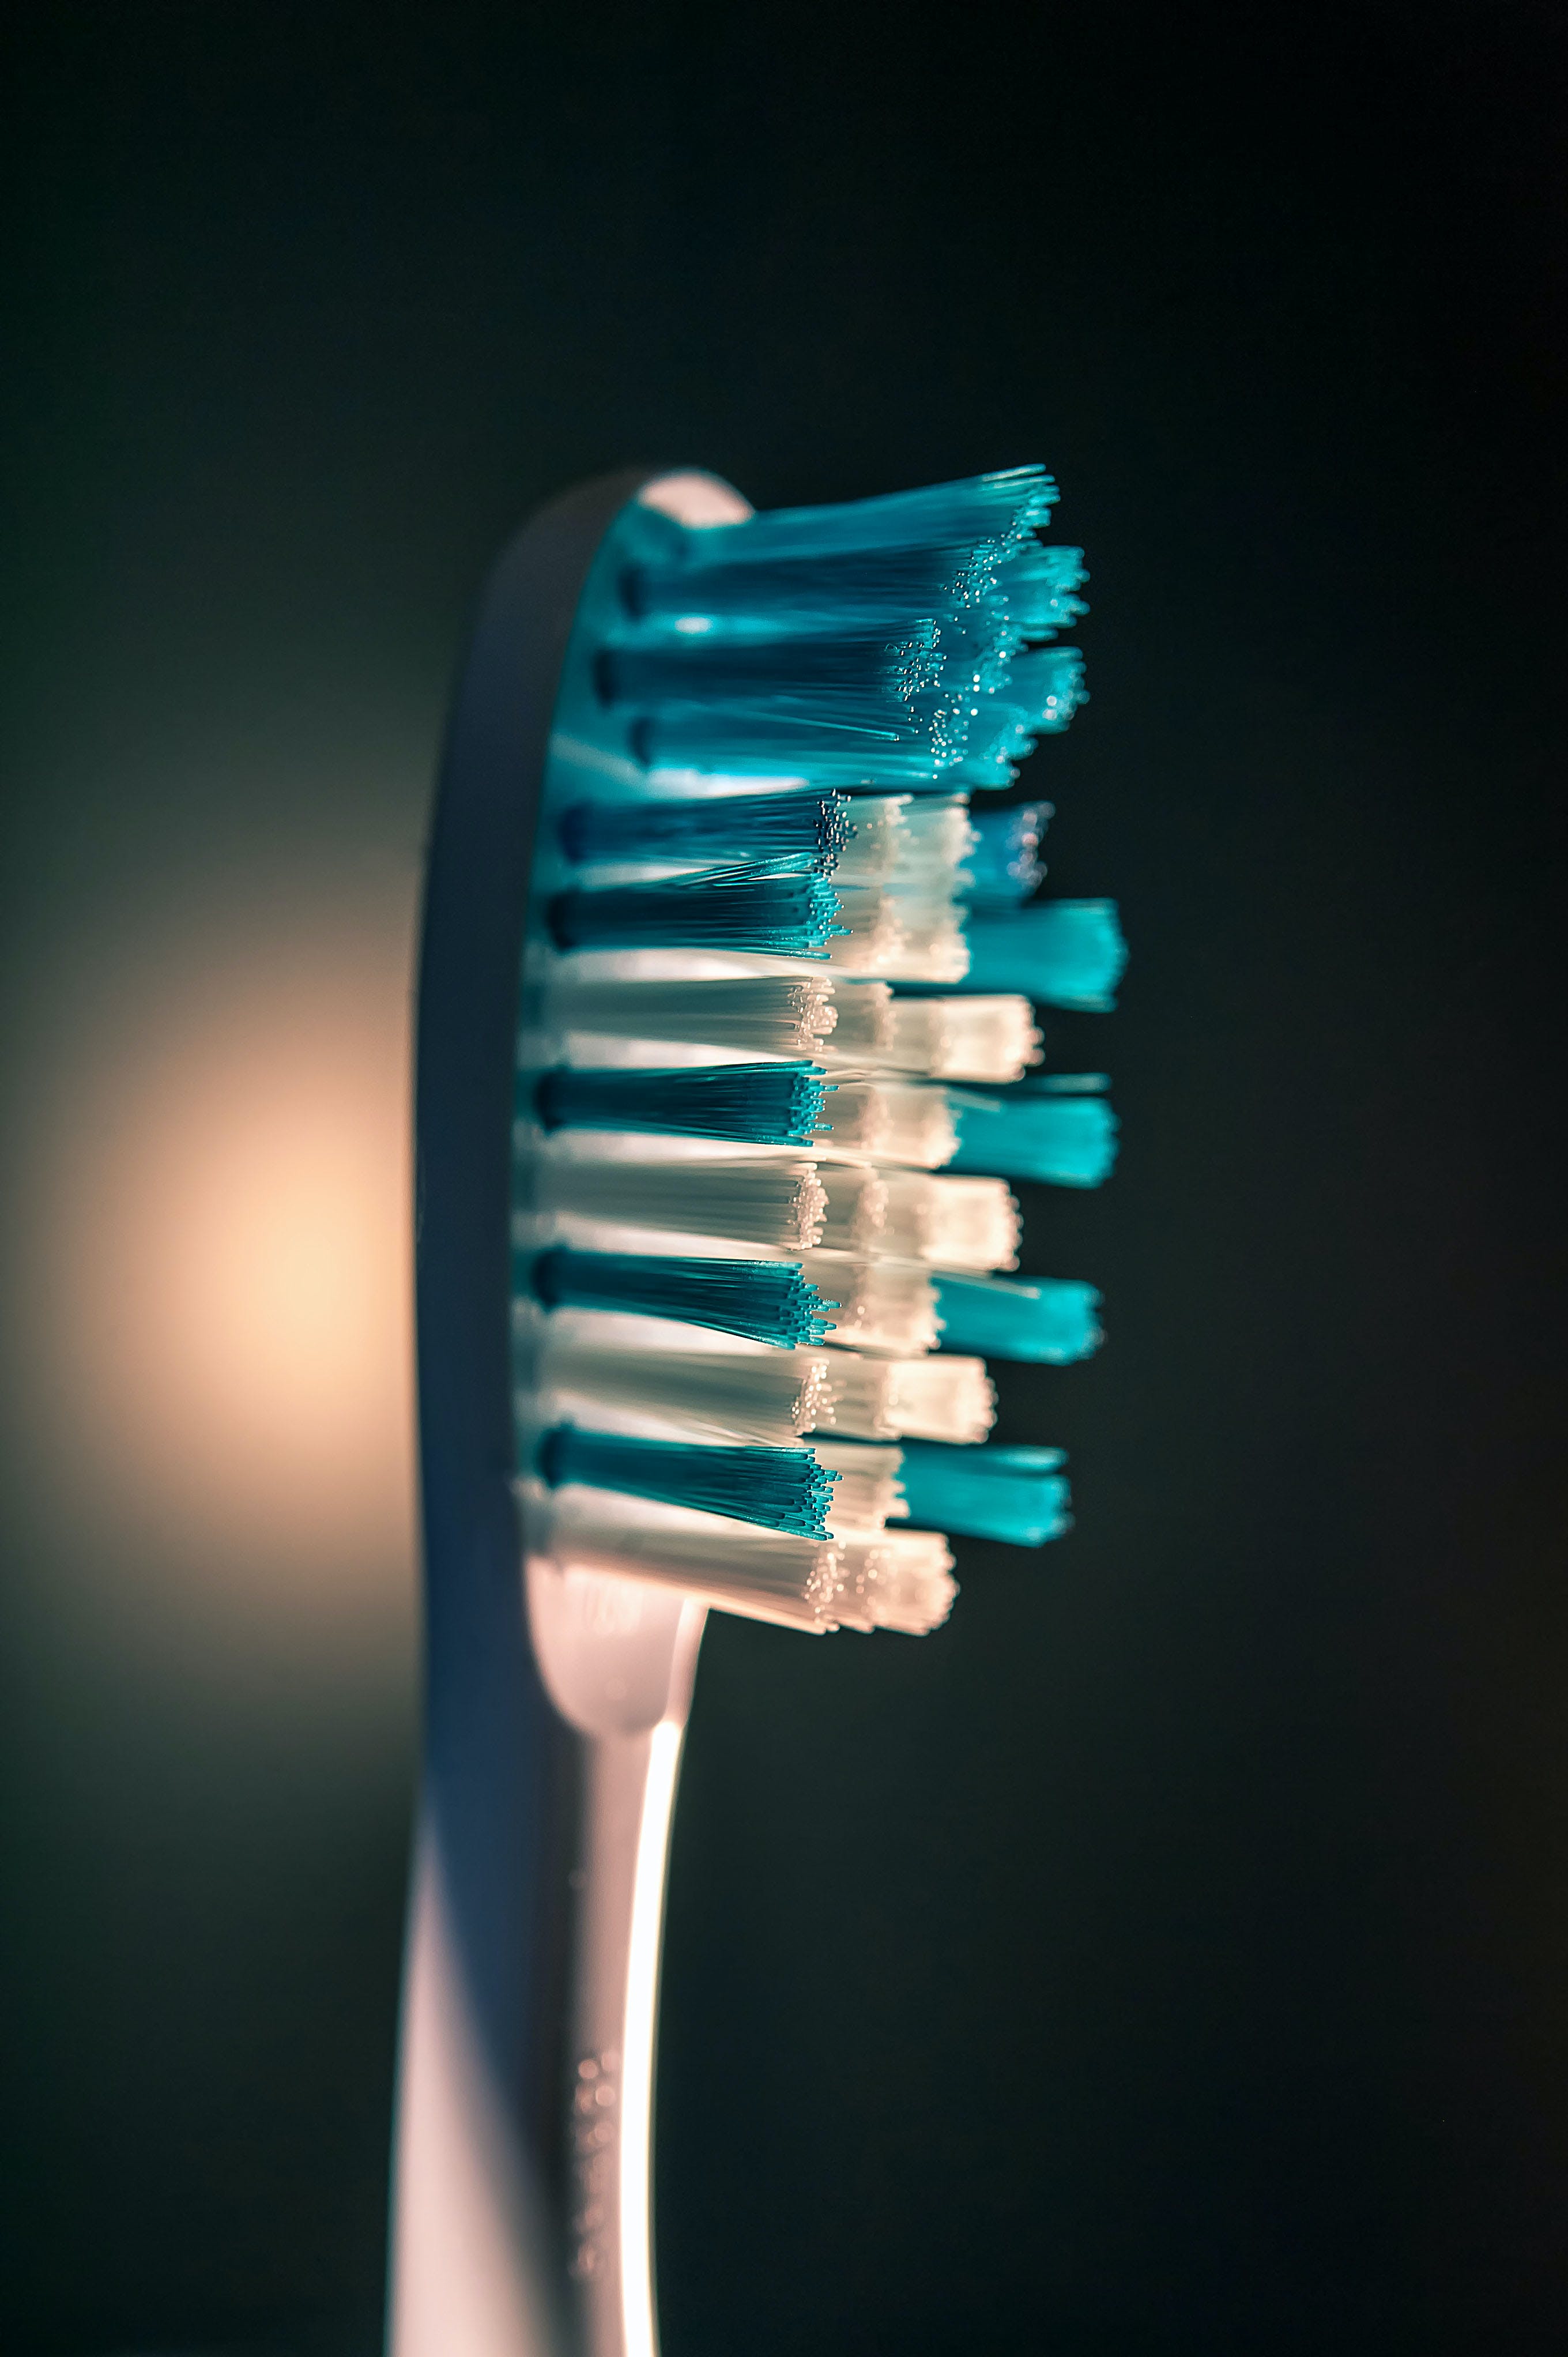 A closeup photo of a toothbrush. | Source: Pexels